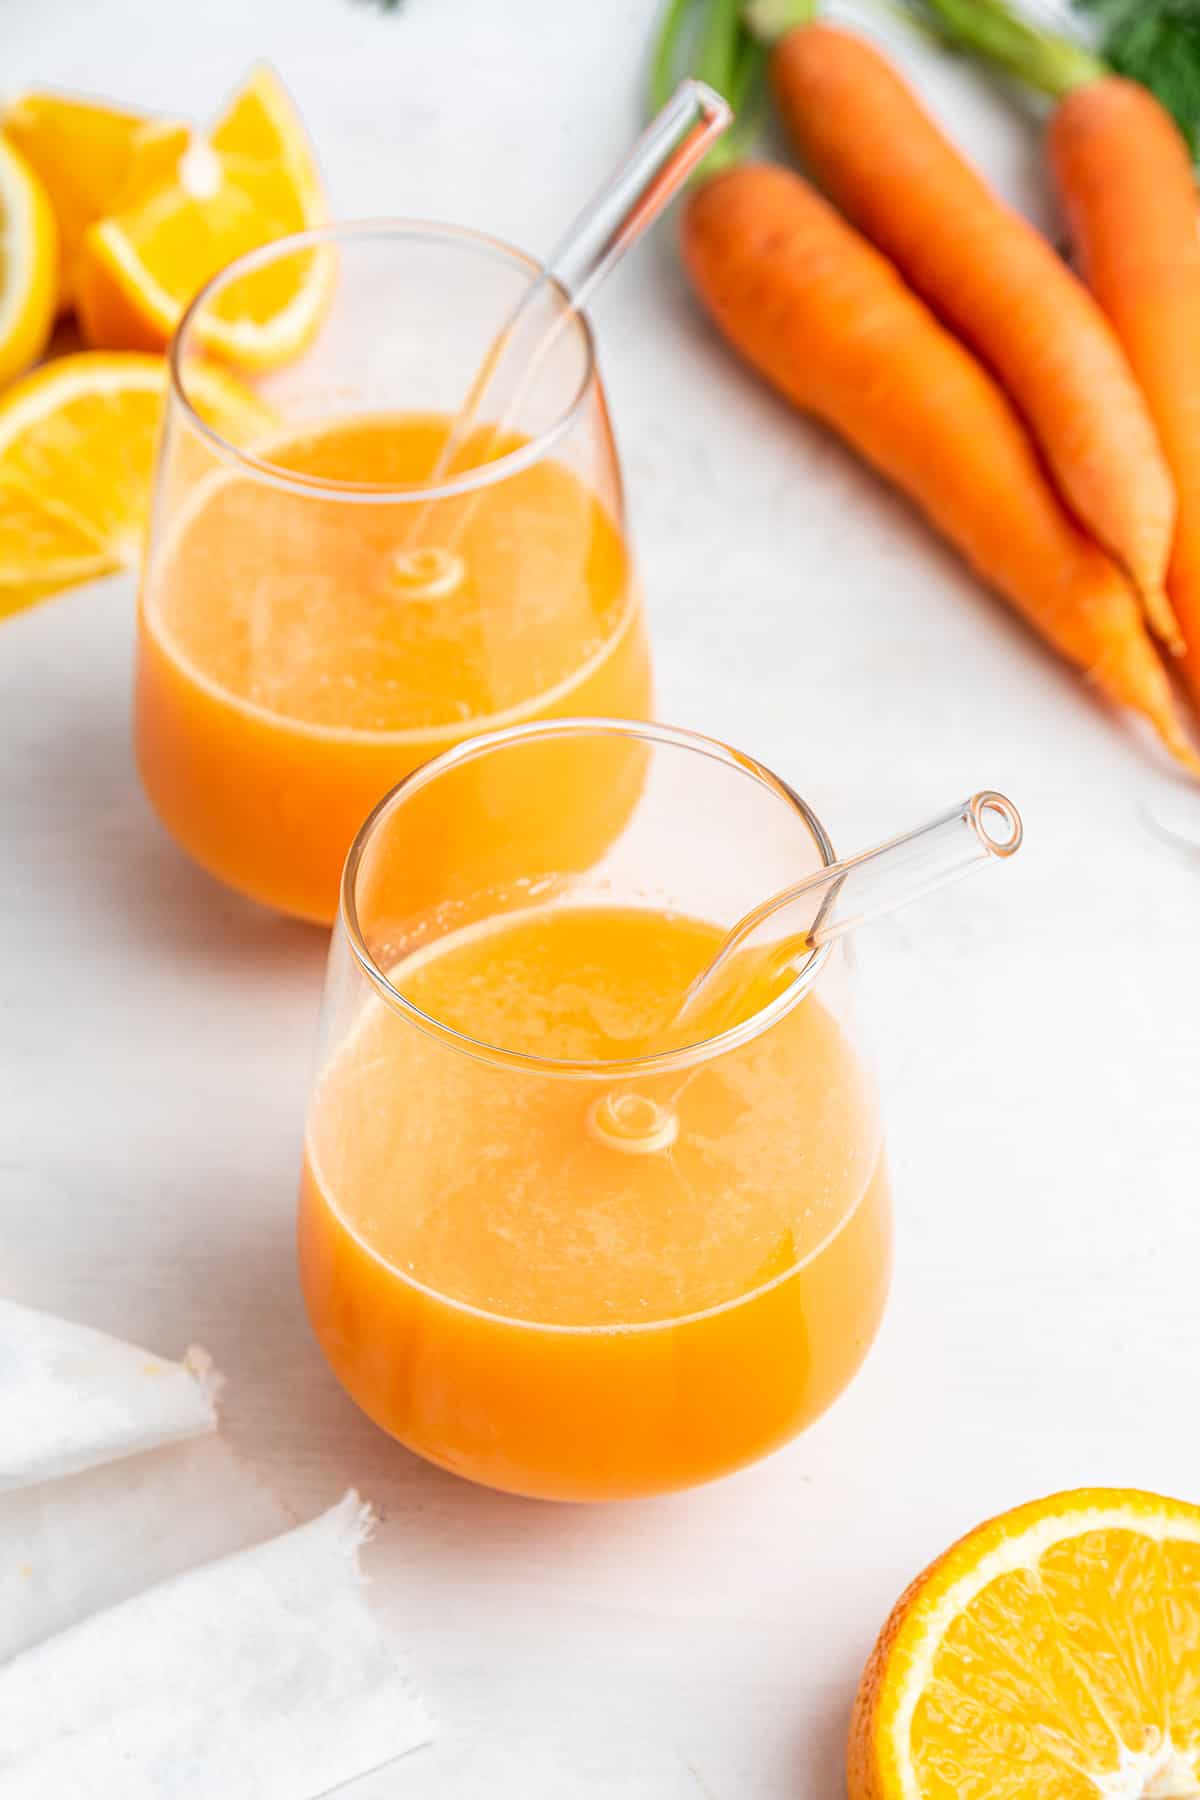 Two glasses of carrot juice with glass straws, surrounded by sliced oranges and carrots